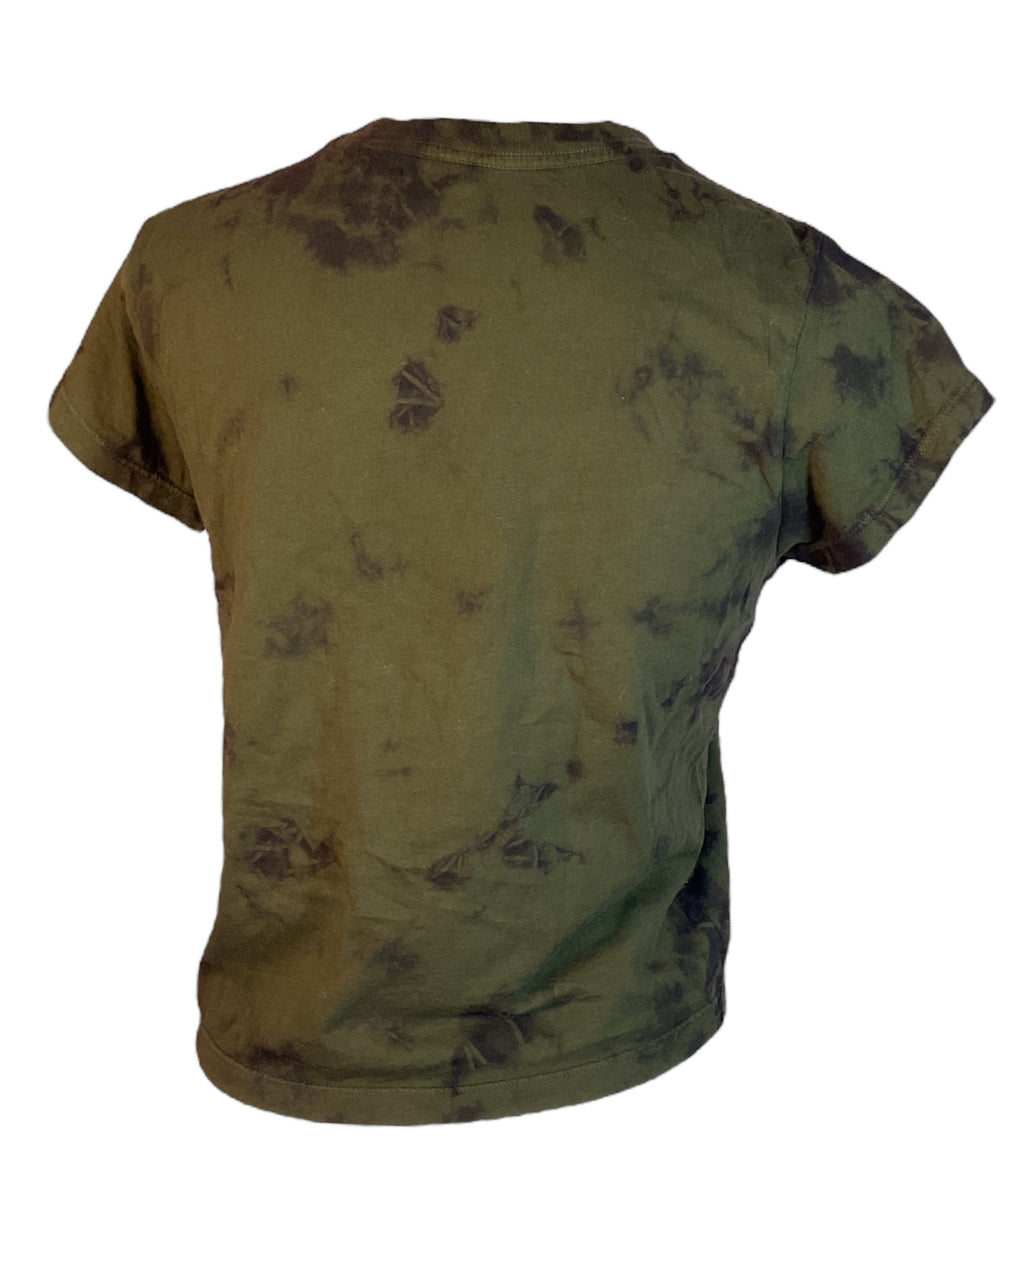 Green Tiedye By Product Graphic Tee, L